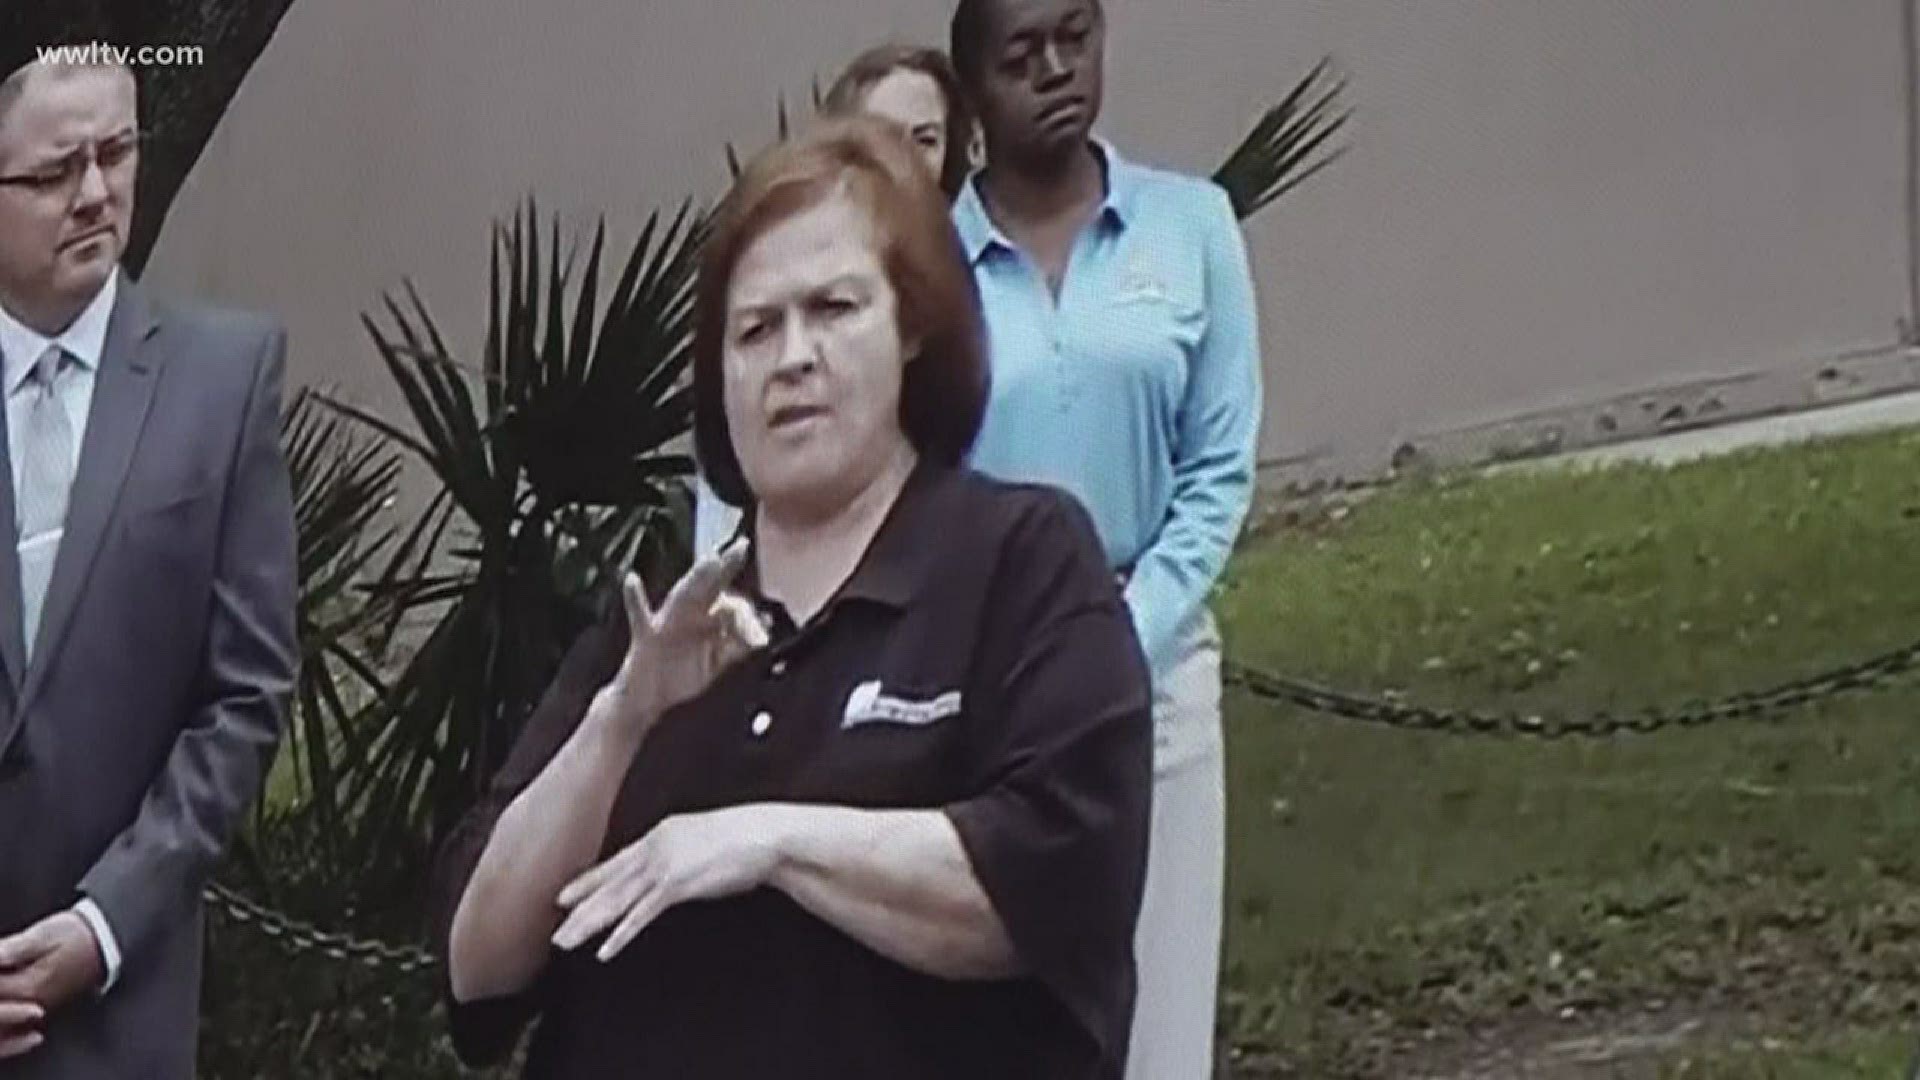 Sign language interpreters grab quite a bit of attention during press conferences of vital importance and they serve an important need for the hearing impaired.